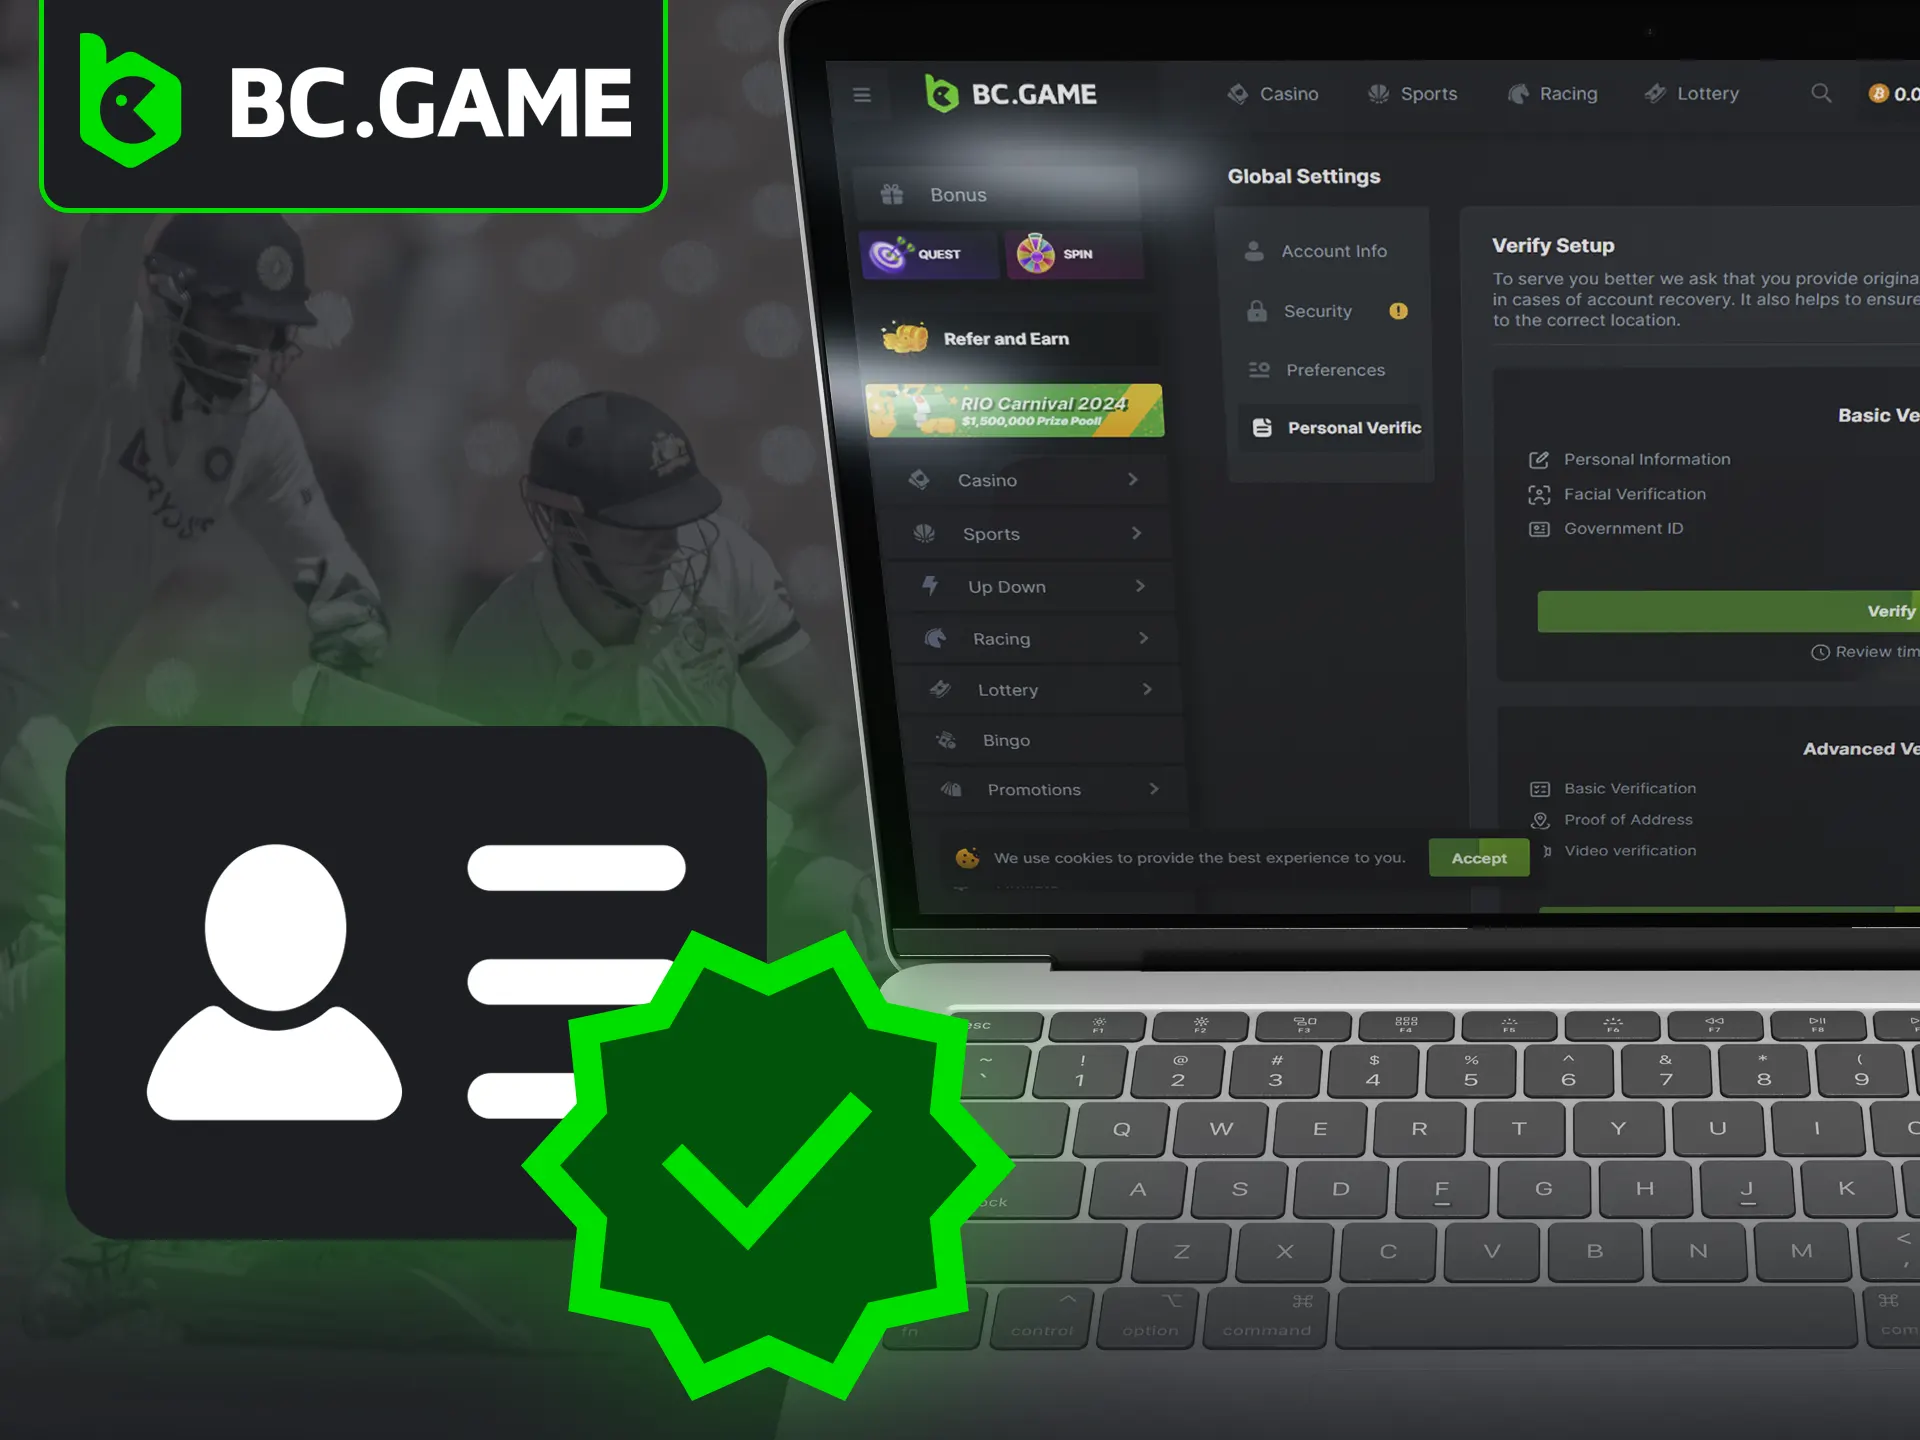 BC Game requires account verification for KYC process.